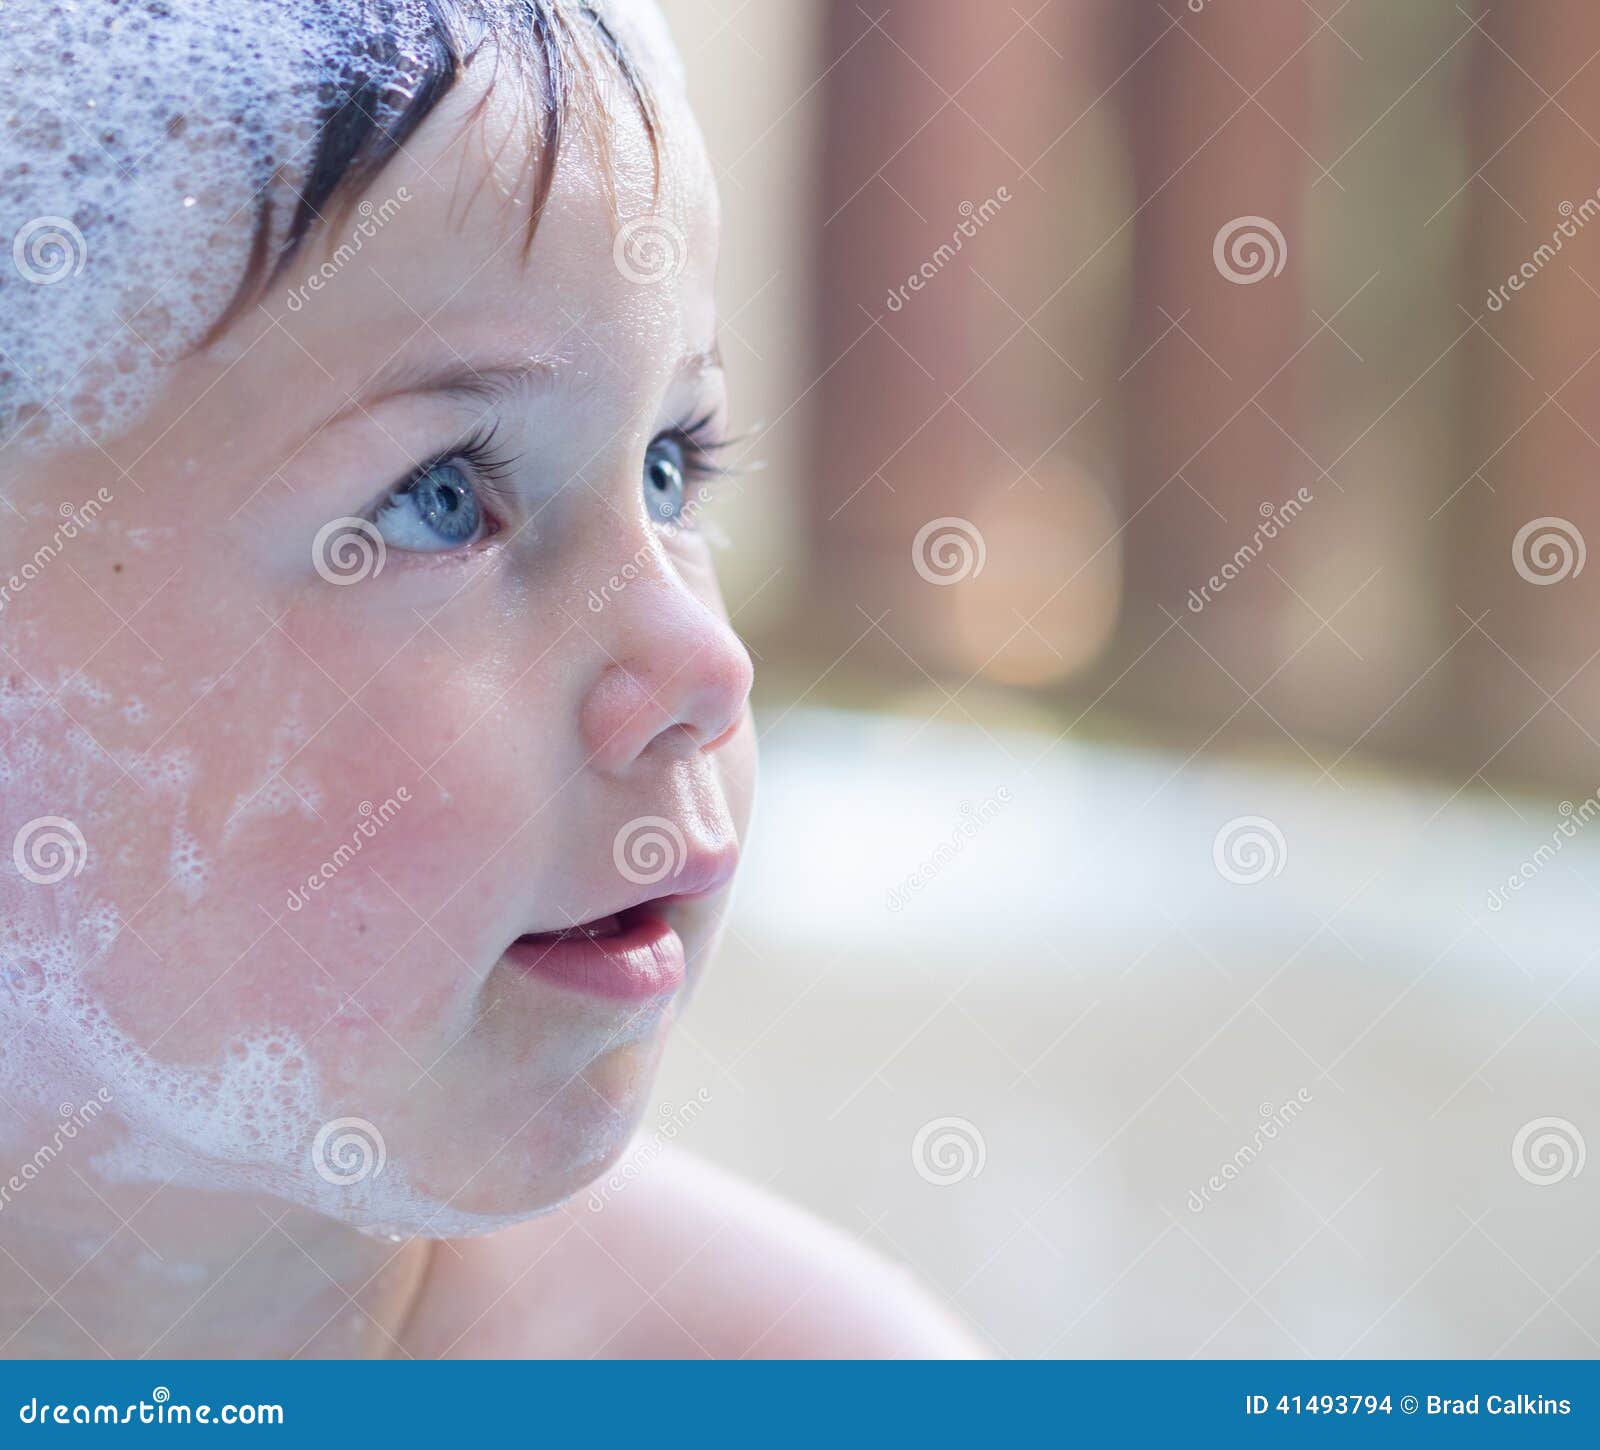 Bubble Bath Stock Photo Image Of Face Looking Look 41493794